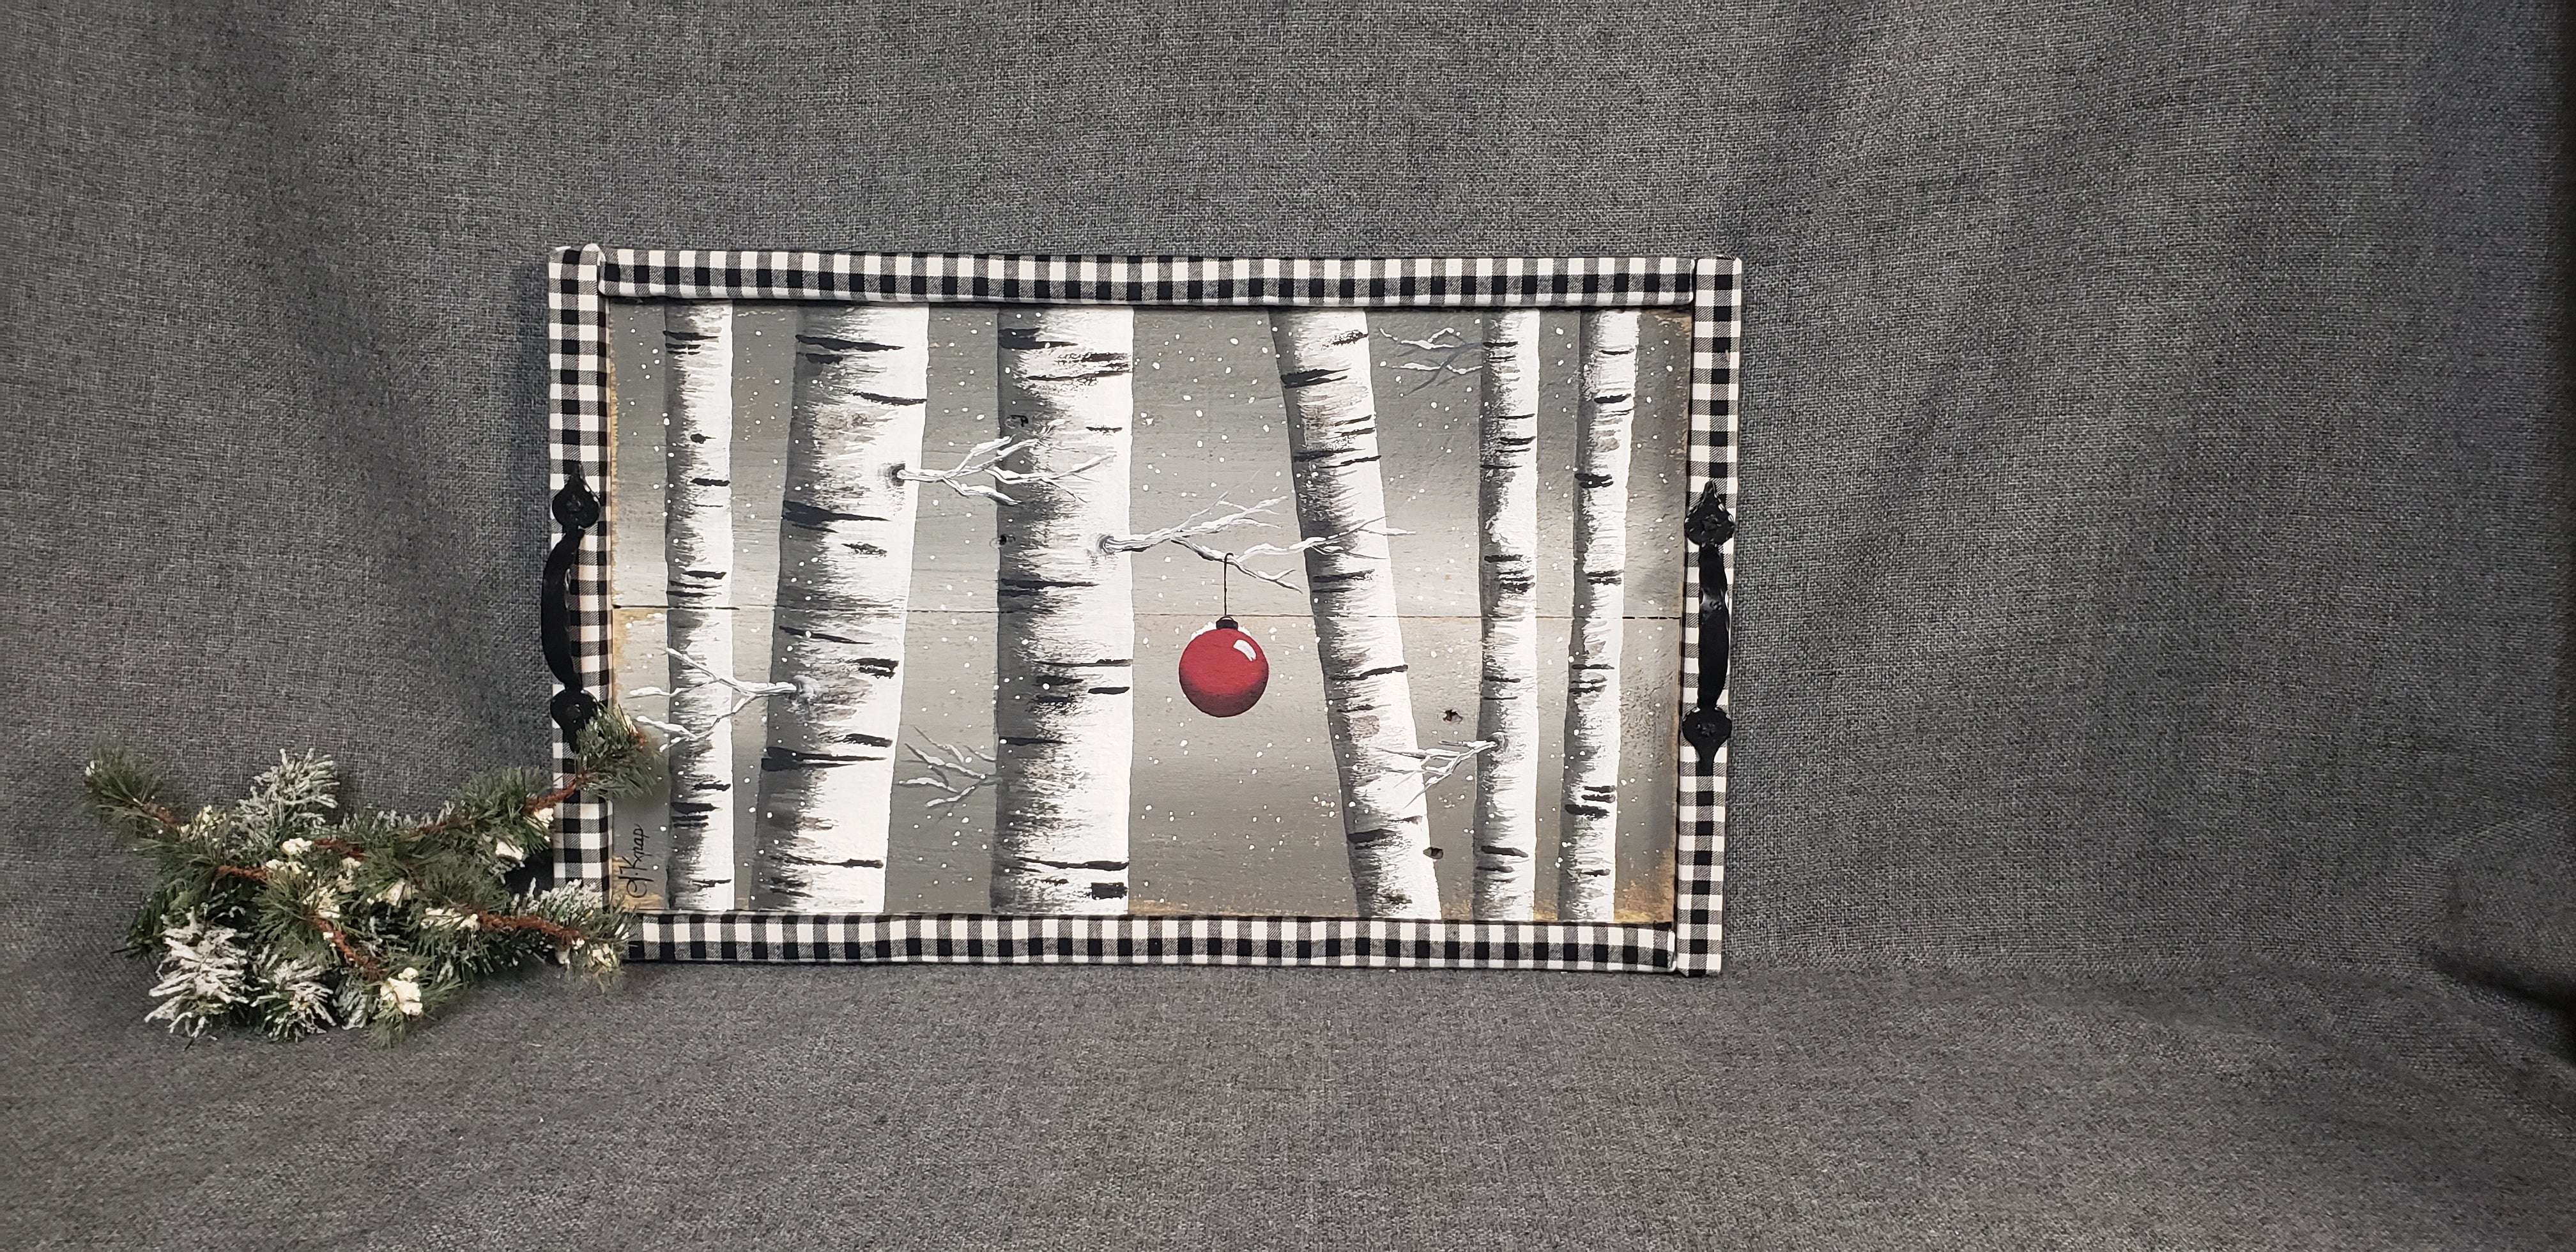 Decorative Christmas pallet tray, Farmhouse White birch painting, Holiday decor serving handle tray